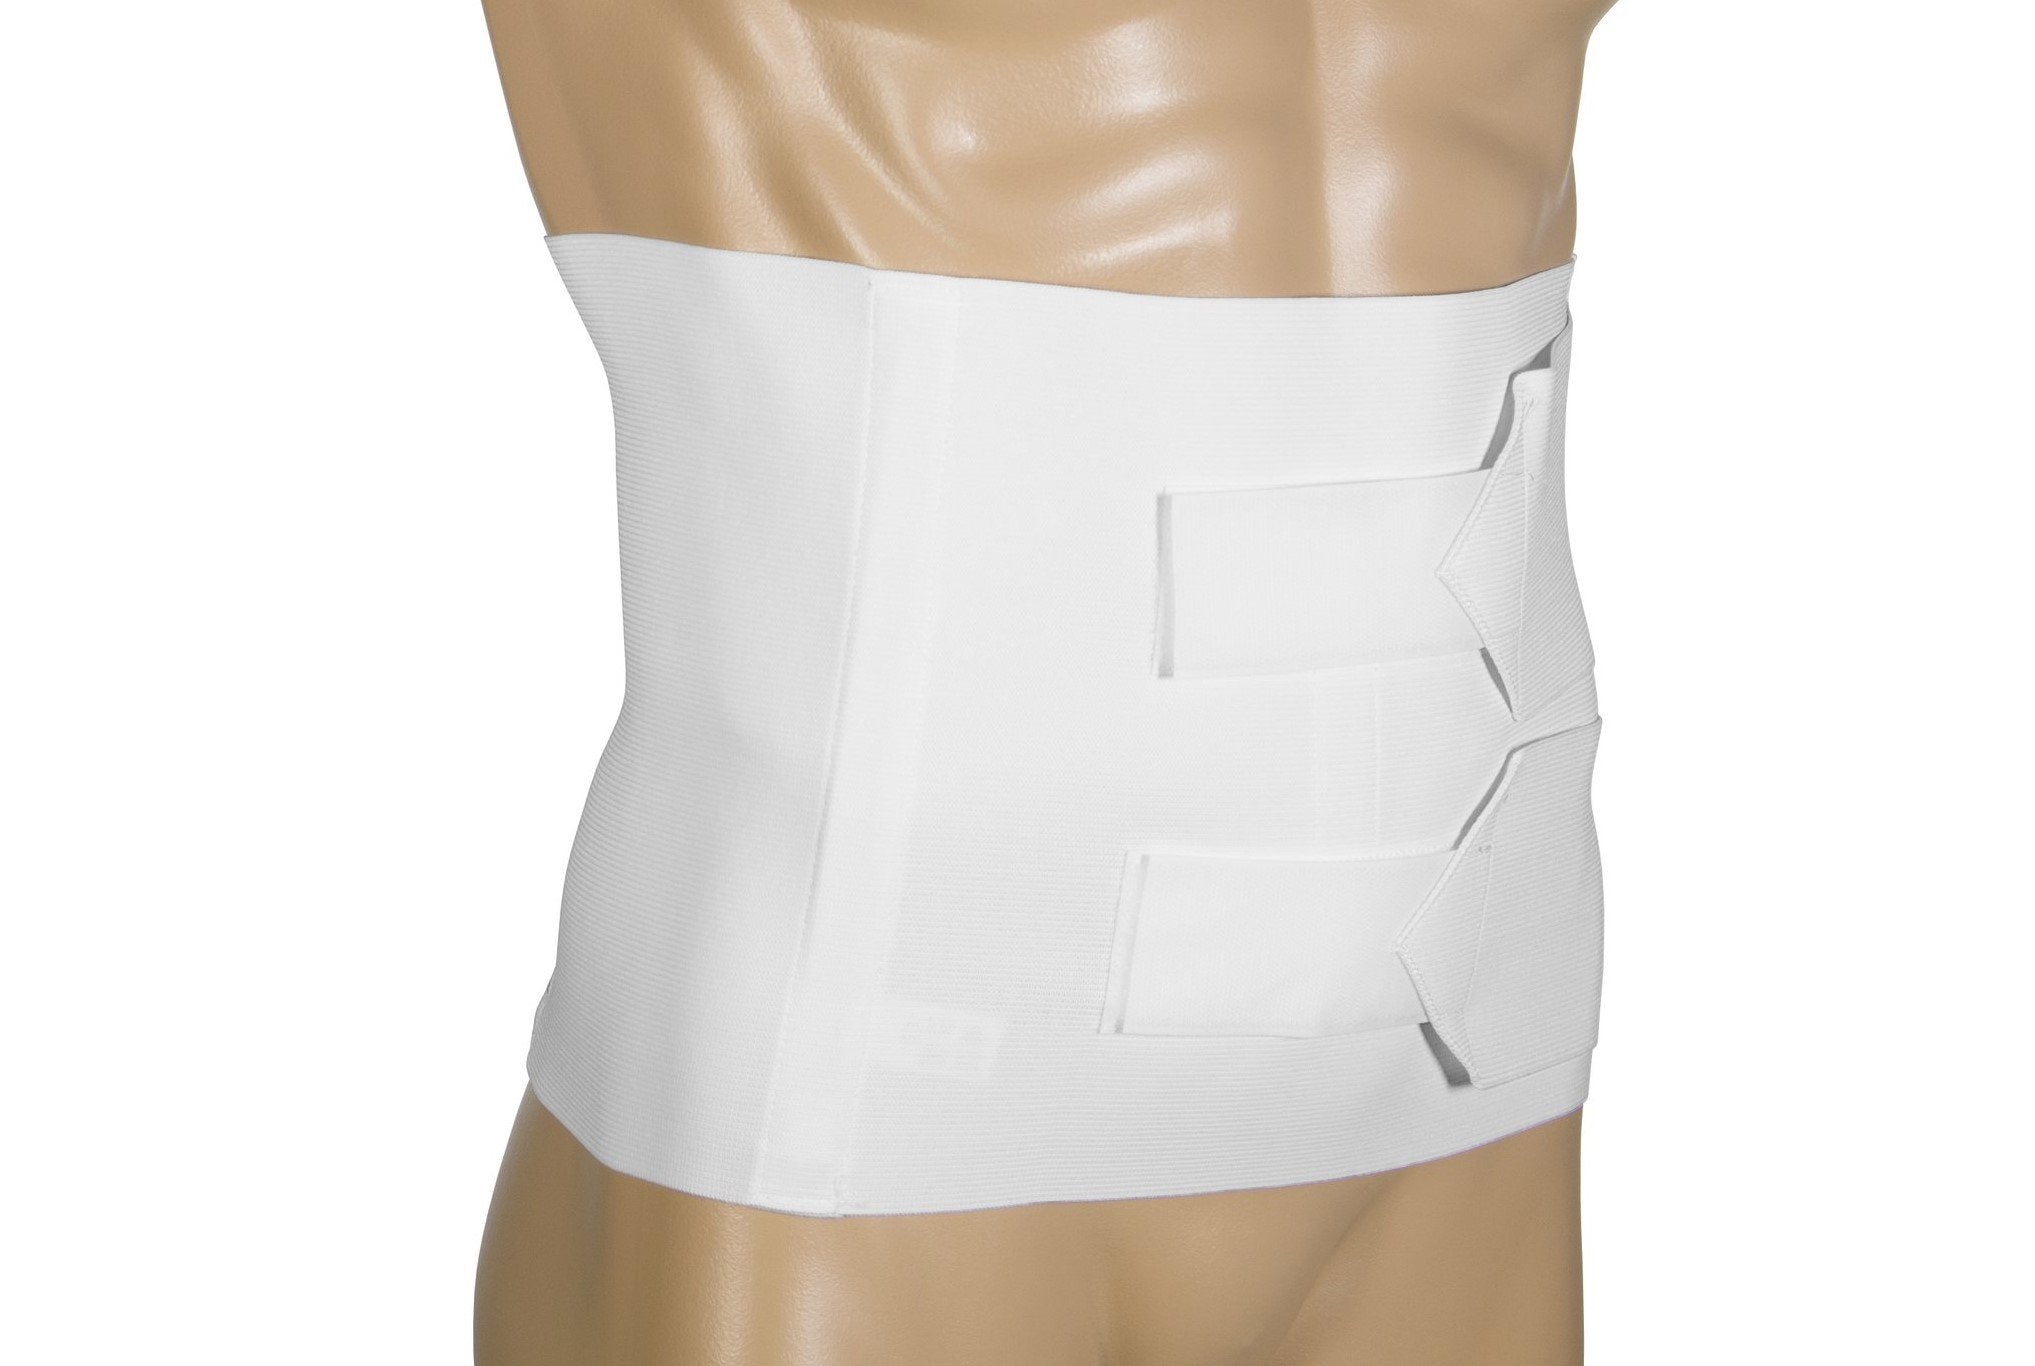 AIR 0516F8 EA/1 ELASTIC ABDOMINAL SUPPORT WHITE 2X-LARGE (48-54")